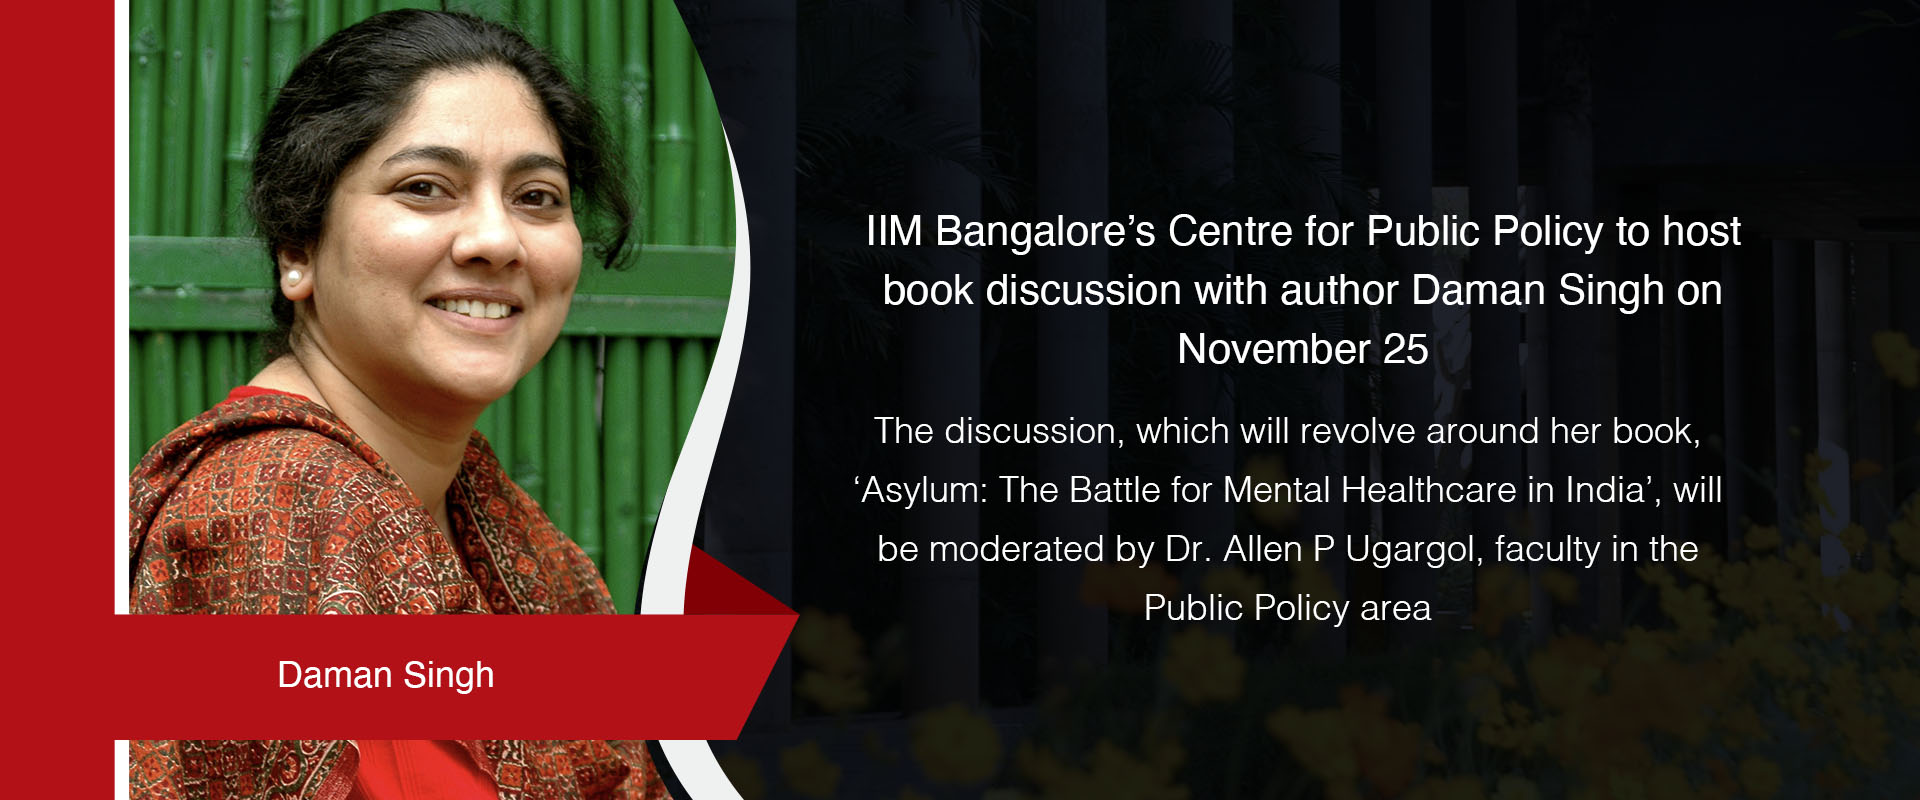 IIM Bangalore’s Centre for Public Policy to host book discussion with author Daman Singh on November 25